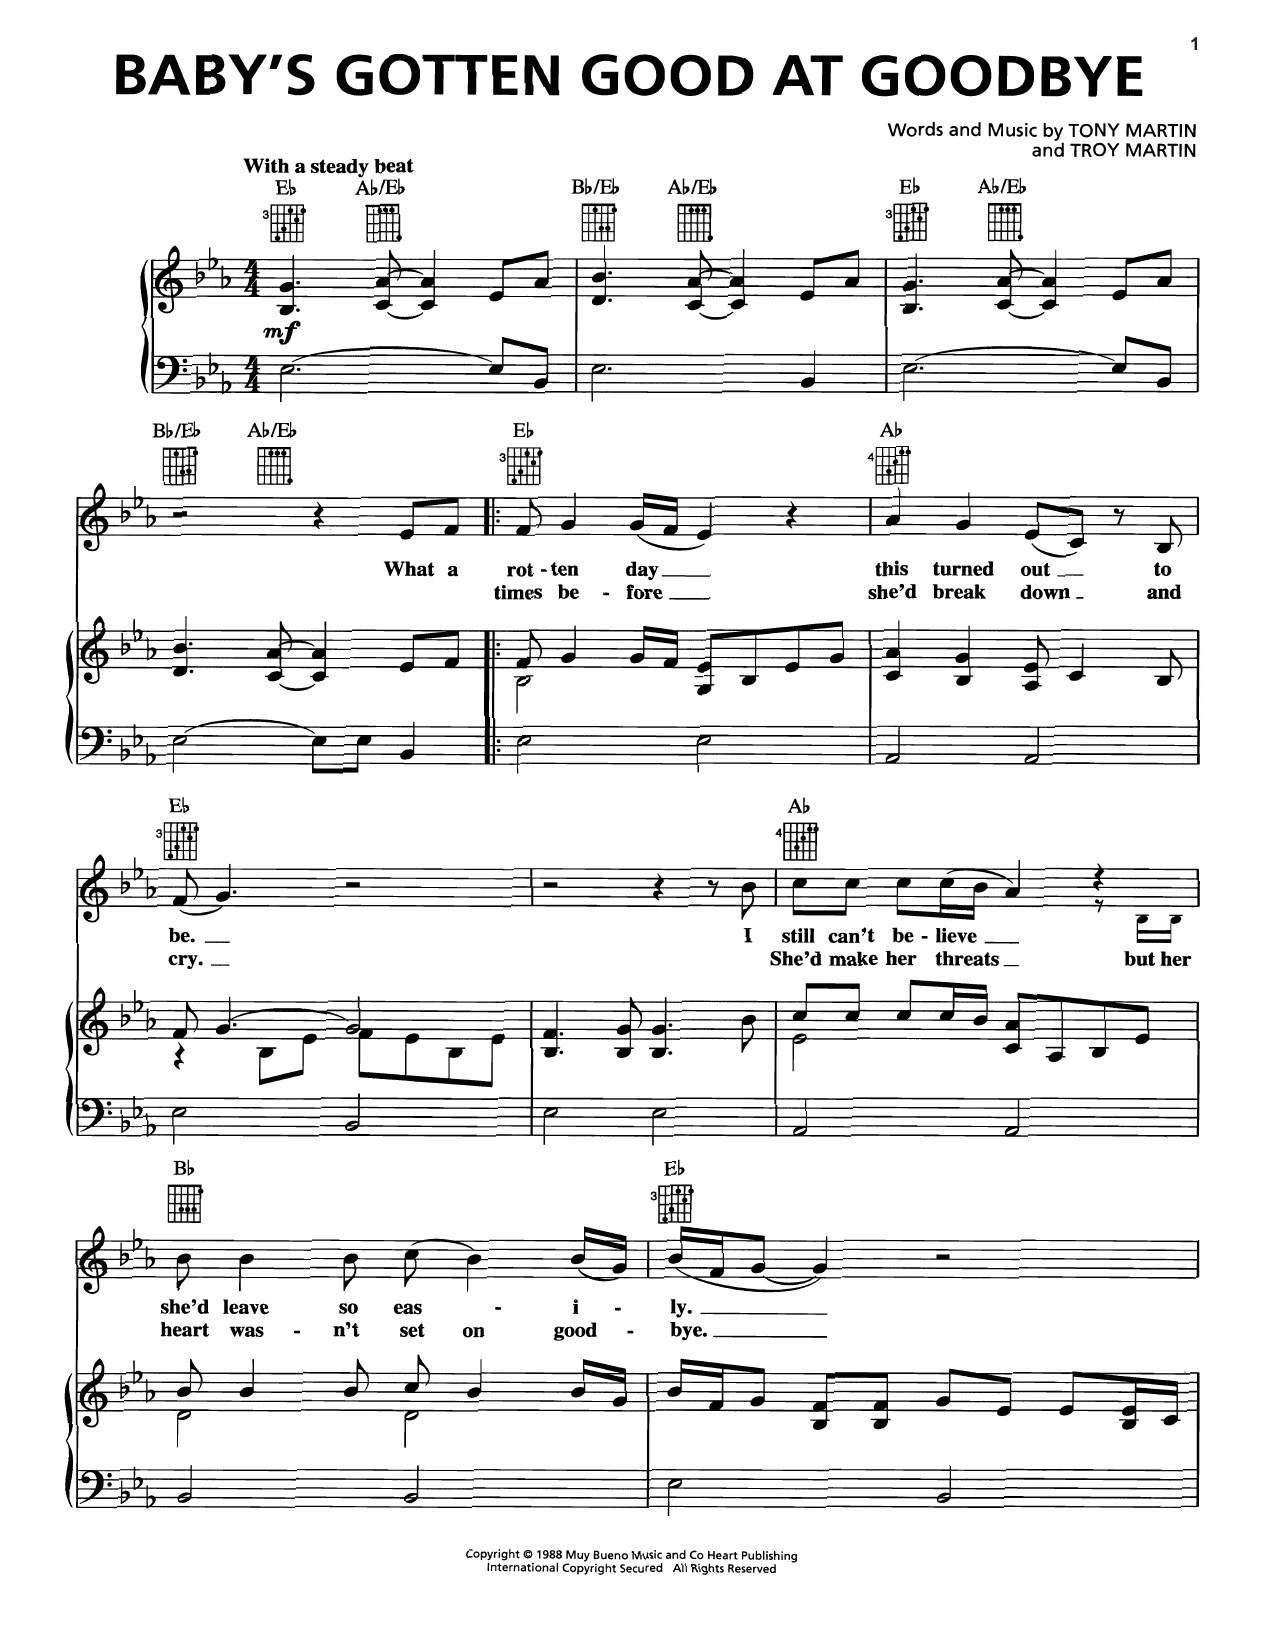 George Strait Baby's Gotten Good At Goodbye sheet music notes and chords. Download Printable PDF.